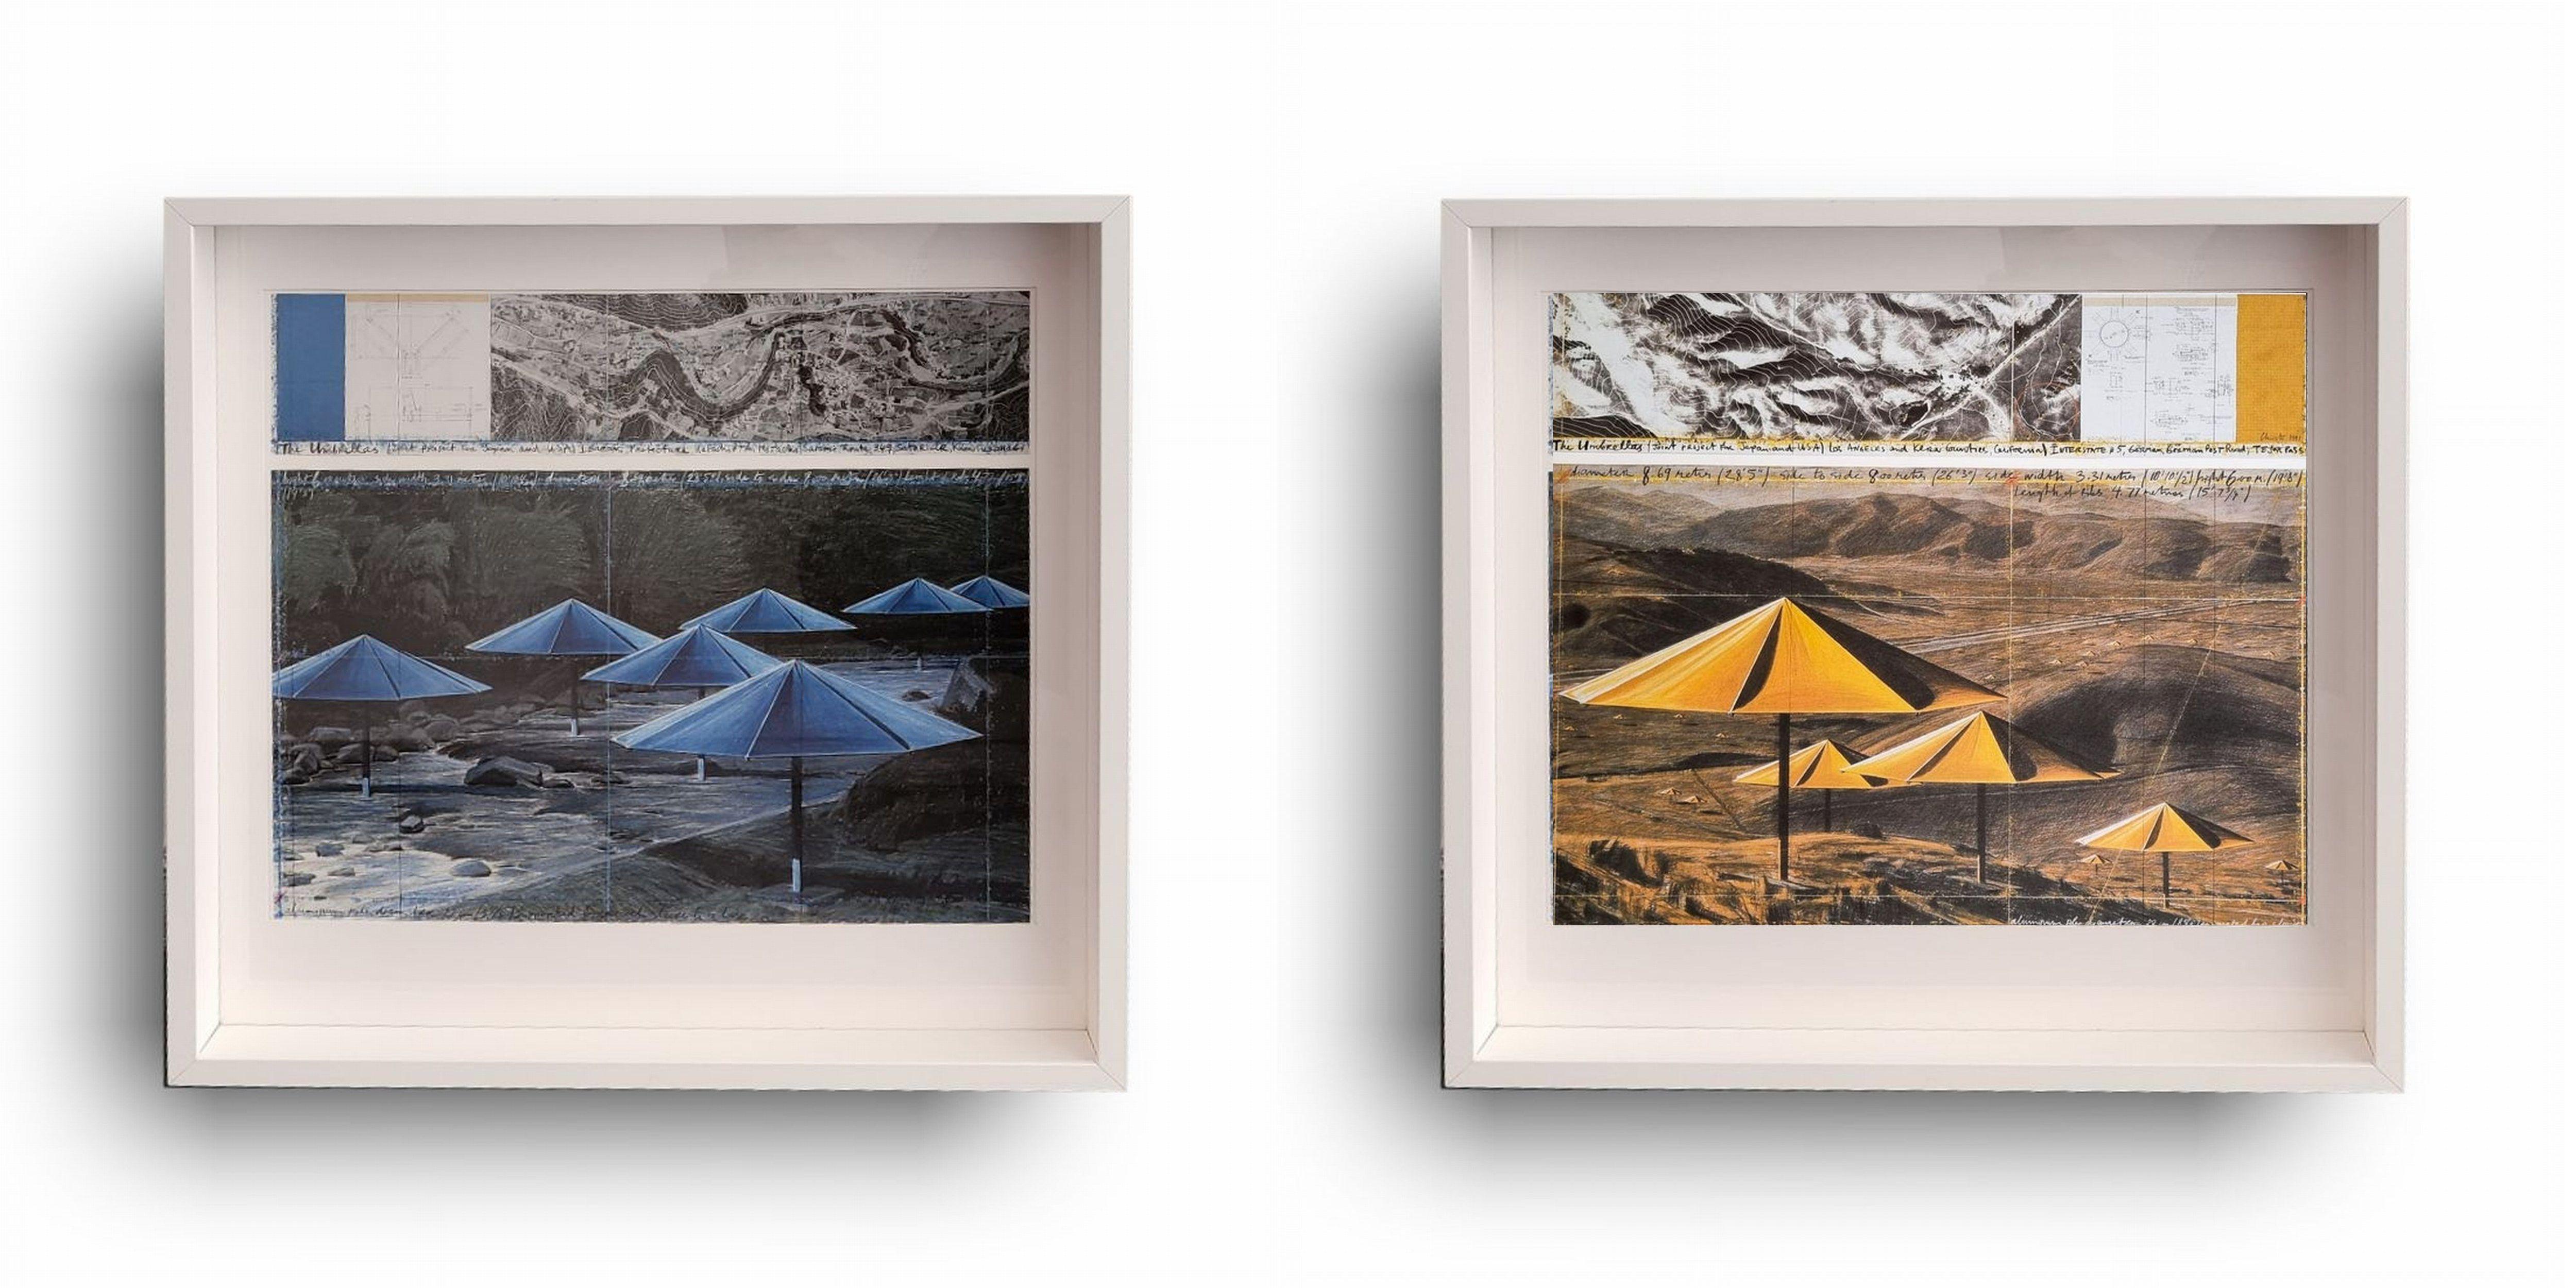 The Umbrellas (BOTH FRAMED - BLACK OR WHITE ... YOU CHOOSE + FREE U.S. SHIPPING) - Print by Christo and Jeanne-Claude